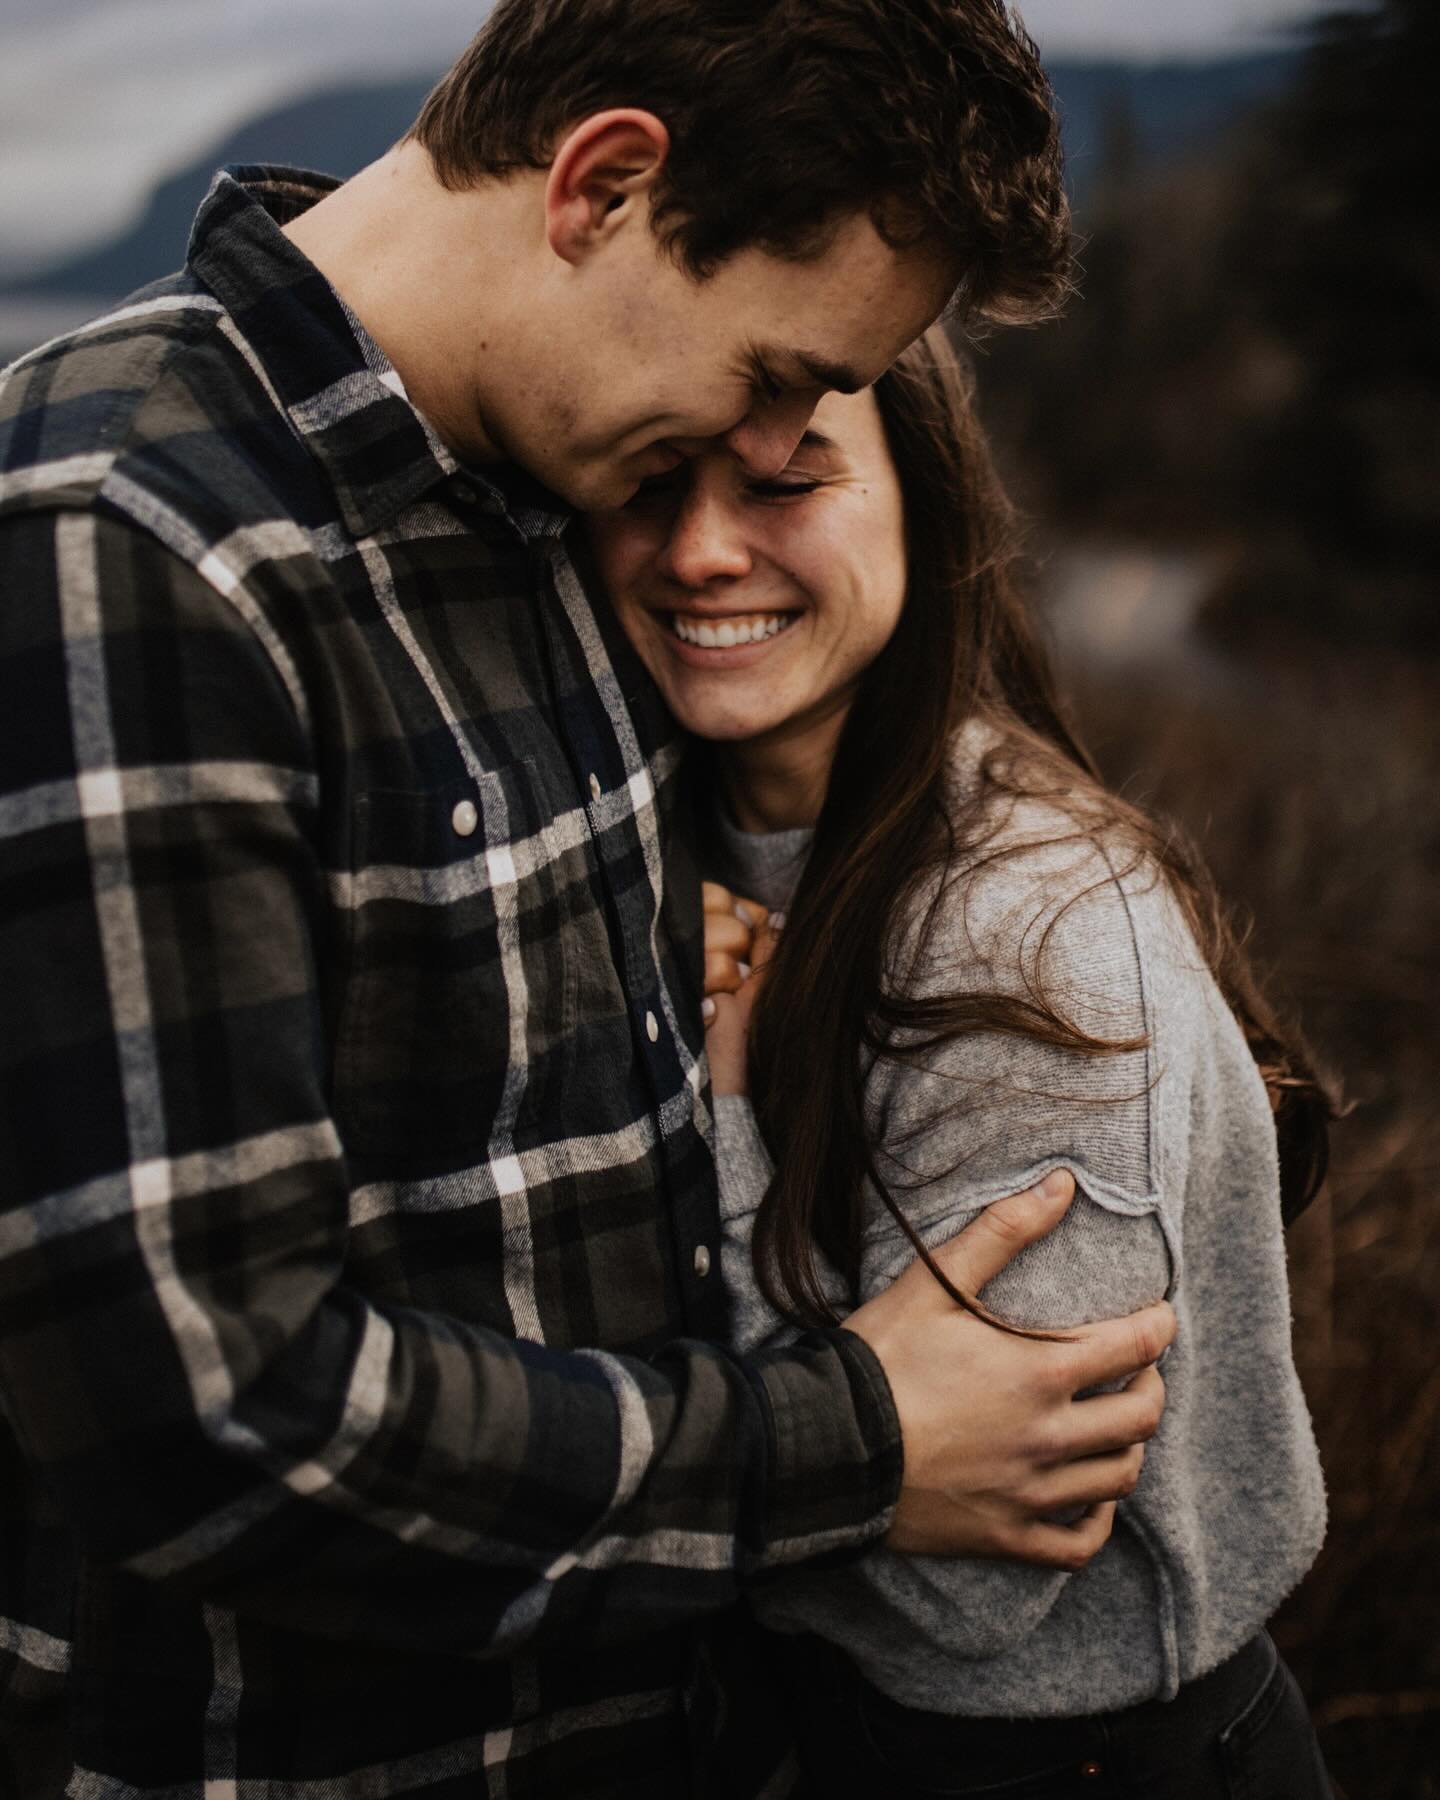 Leah + Will | It was cold and the wind blew and the rain fell and I was lowkey fighting the flu &mdash; but these two were such troopers at their engagement session in the Gorge. Really loved how moody but warm and sweet these photos came out ⛰️

Wou